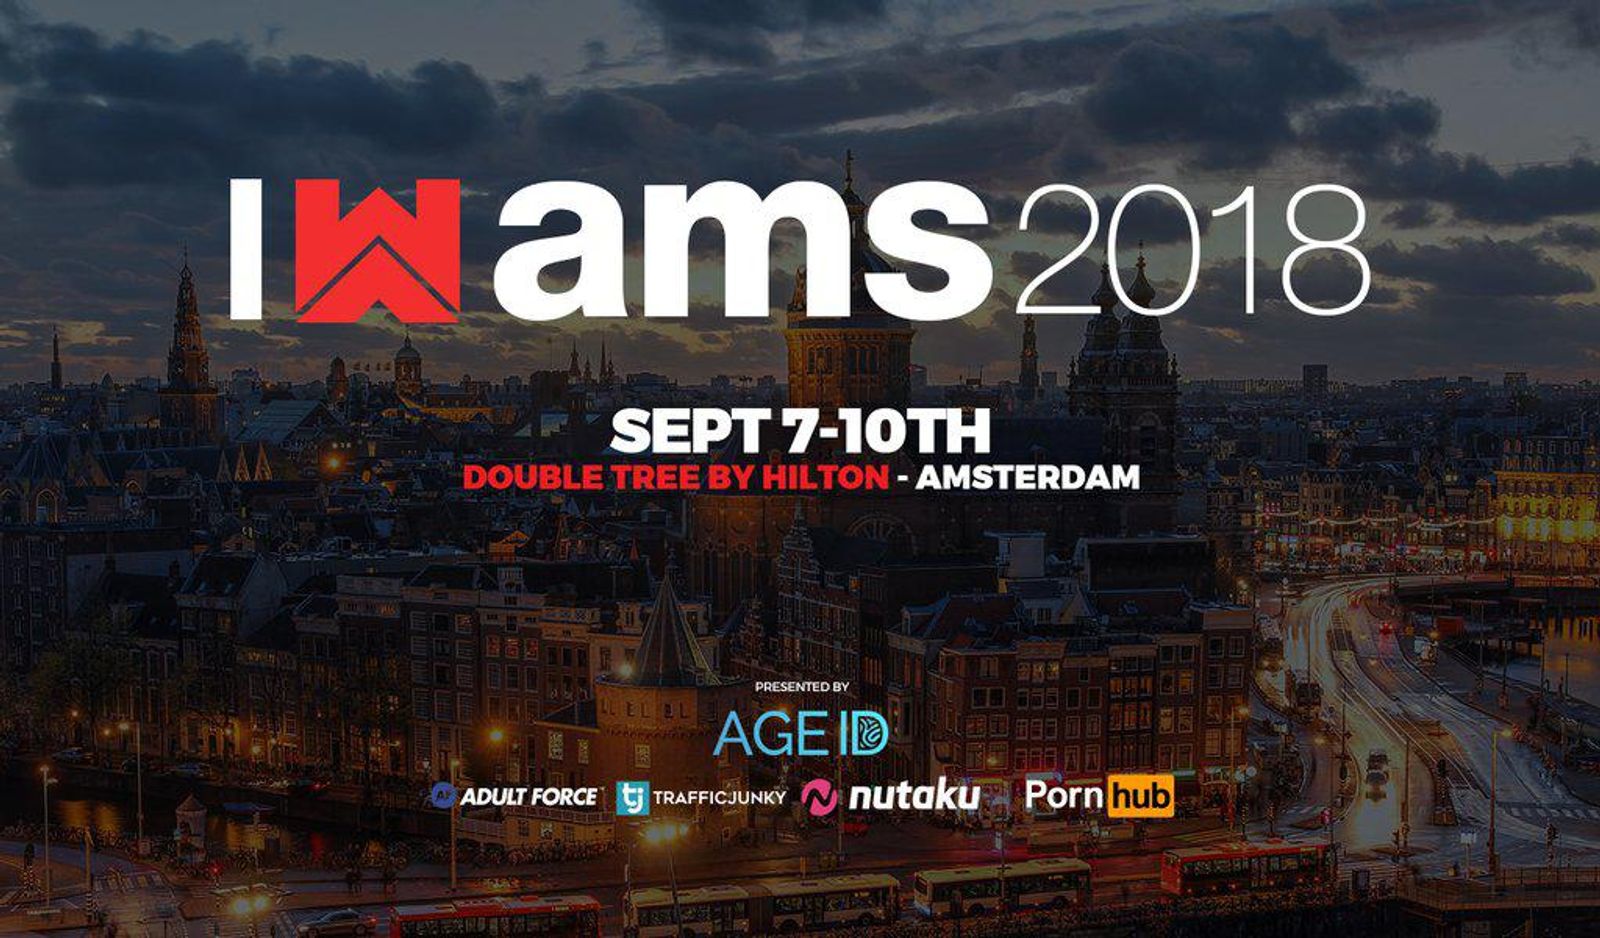 Webmaster Access 2018 Warms Up in Amsterdam